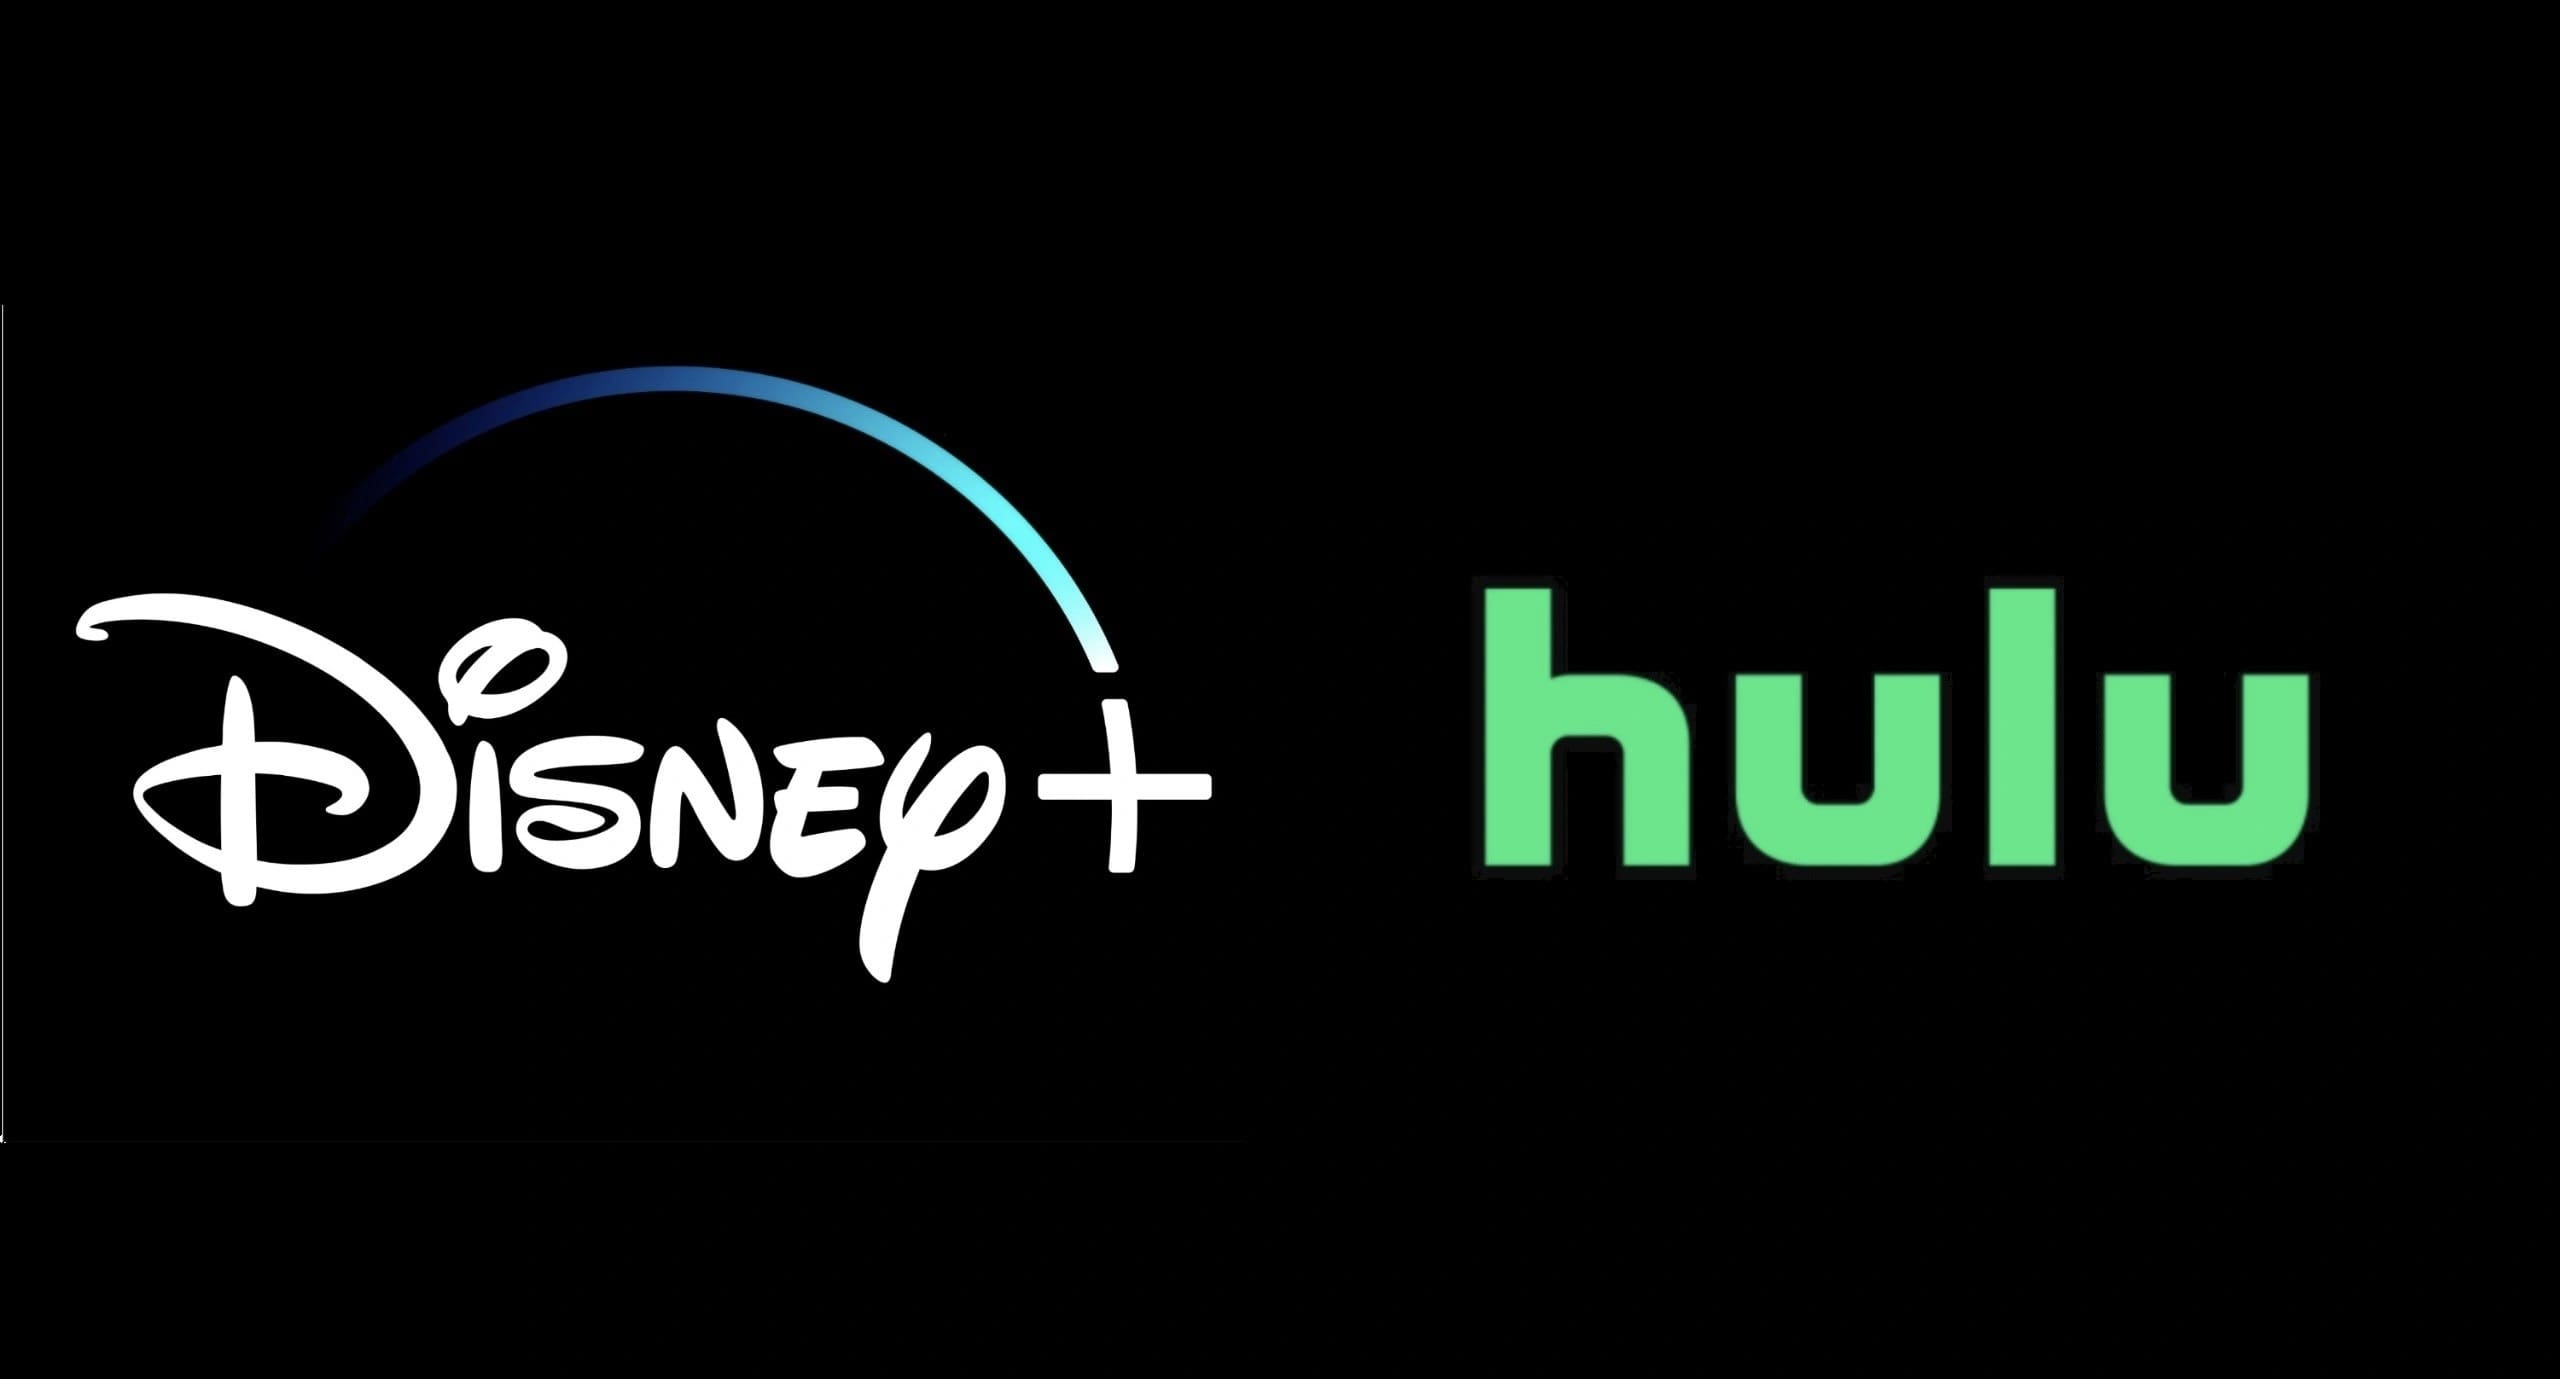 Disney+ And Hulu Are Merging Into One Streaming Service